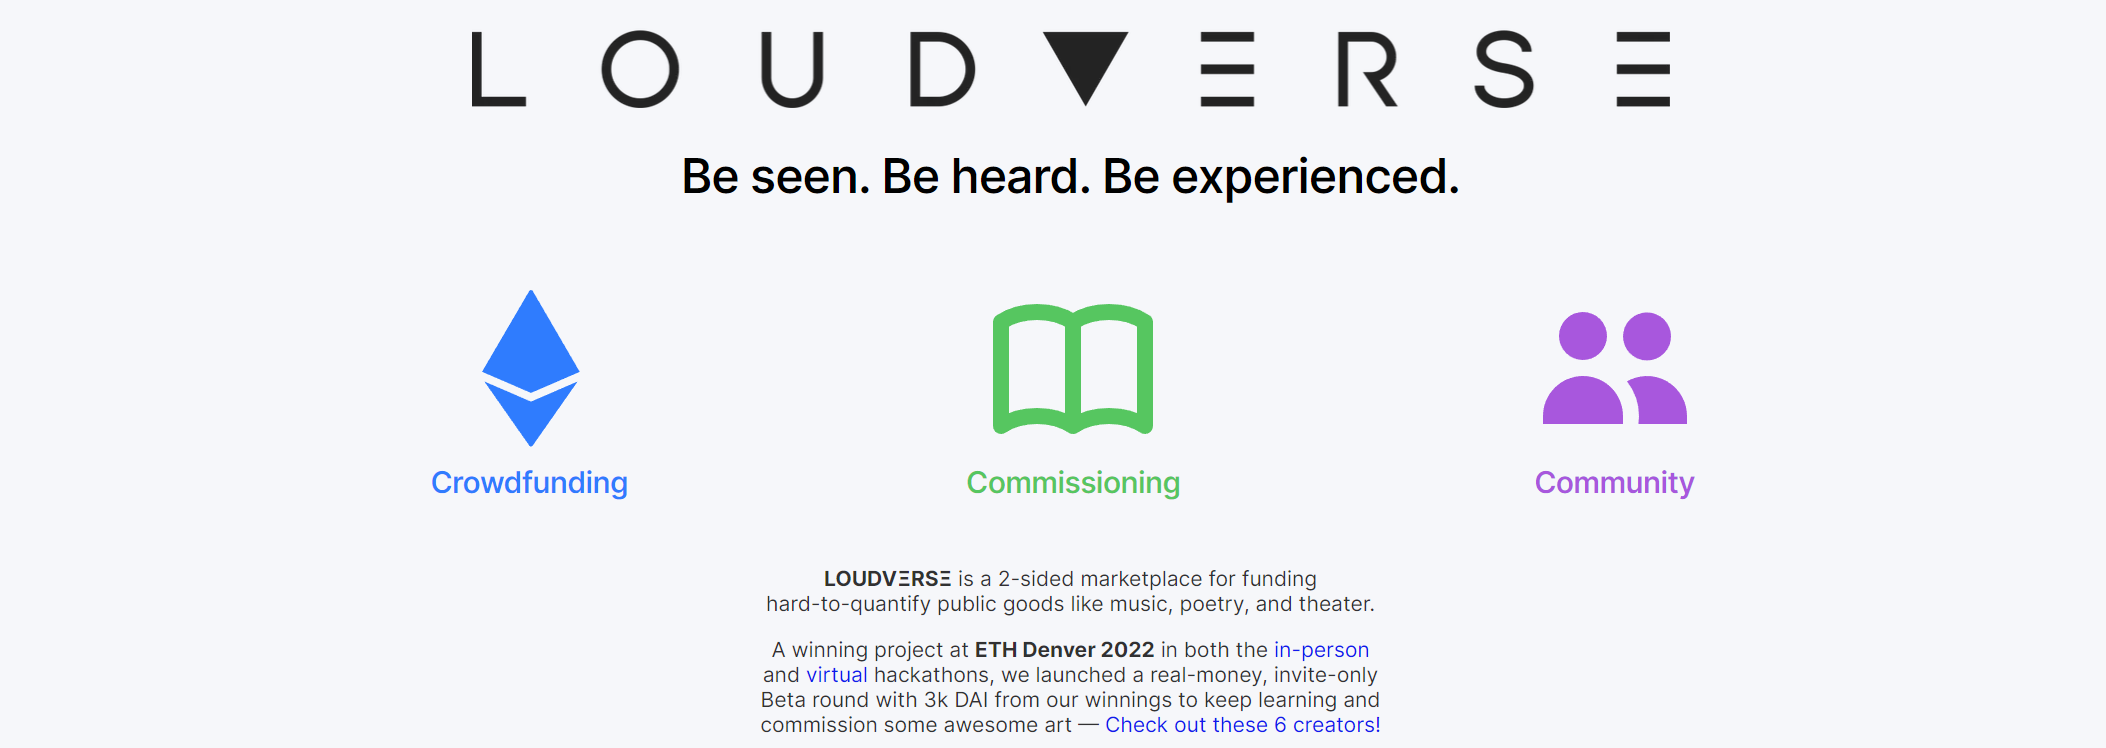 Preview image of Loudverse.